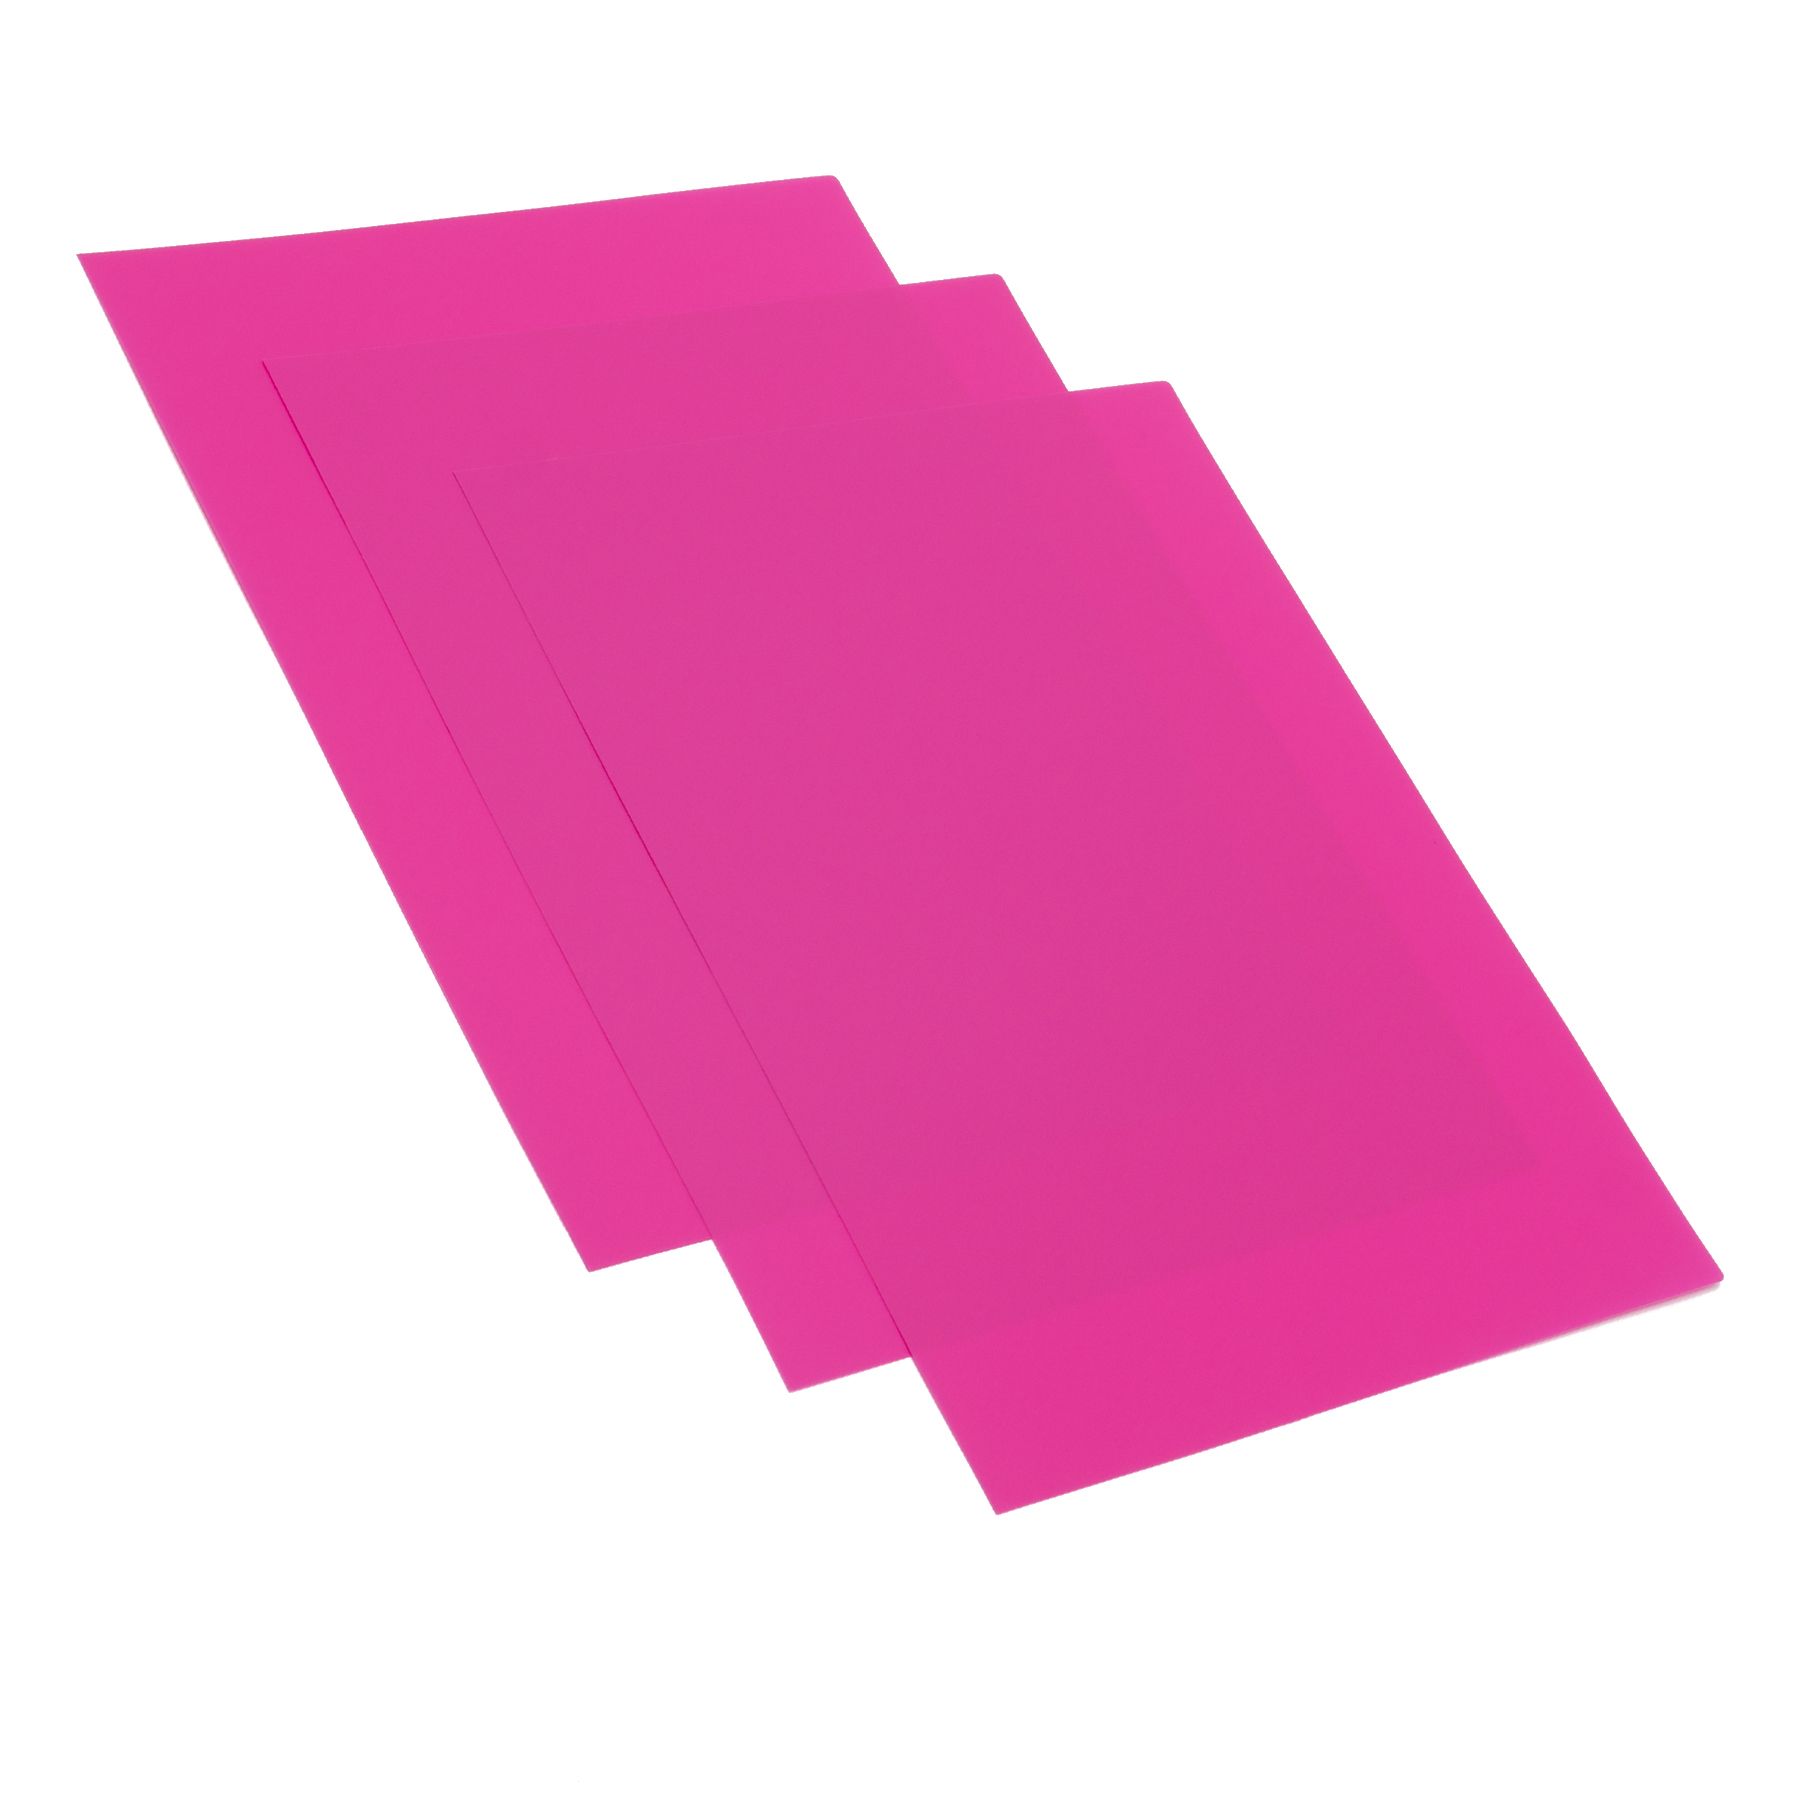 Poly Covers [300 Micron / 12 mil, Solid Fuschia, Round Corner, 8-3/4" x 11-1/4" (222 x 286 mm), Matte / Matte] 50 /Pack - Clearance Sale